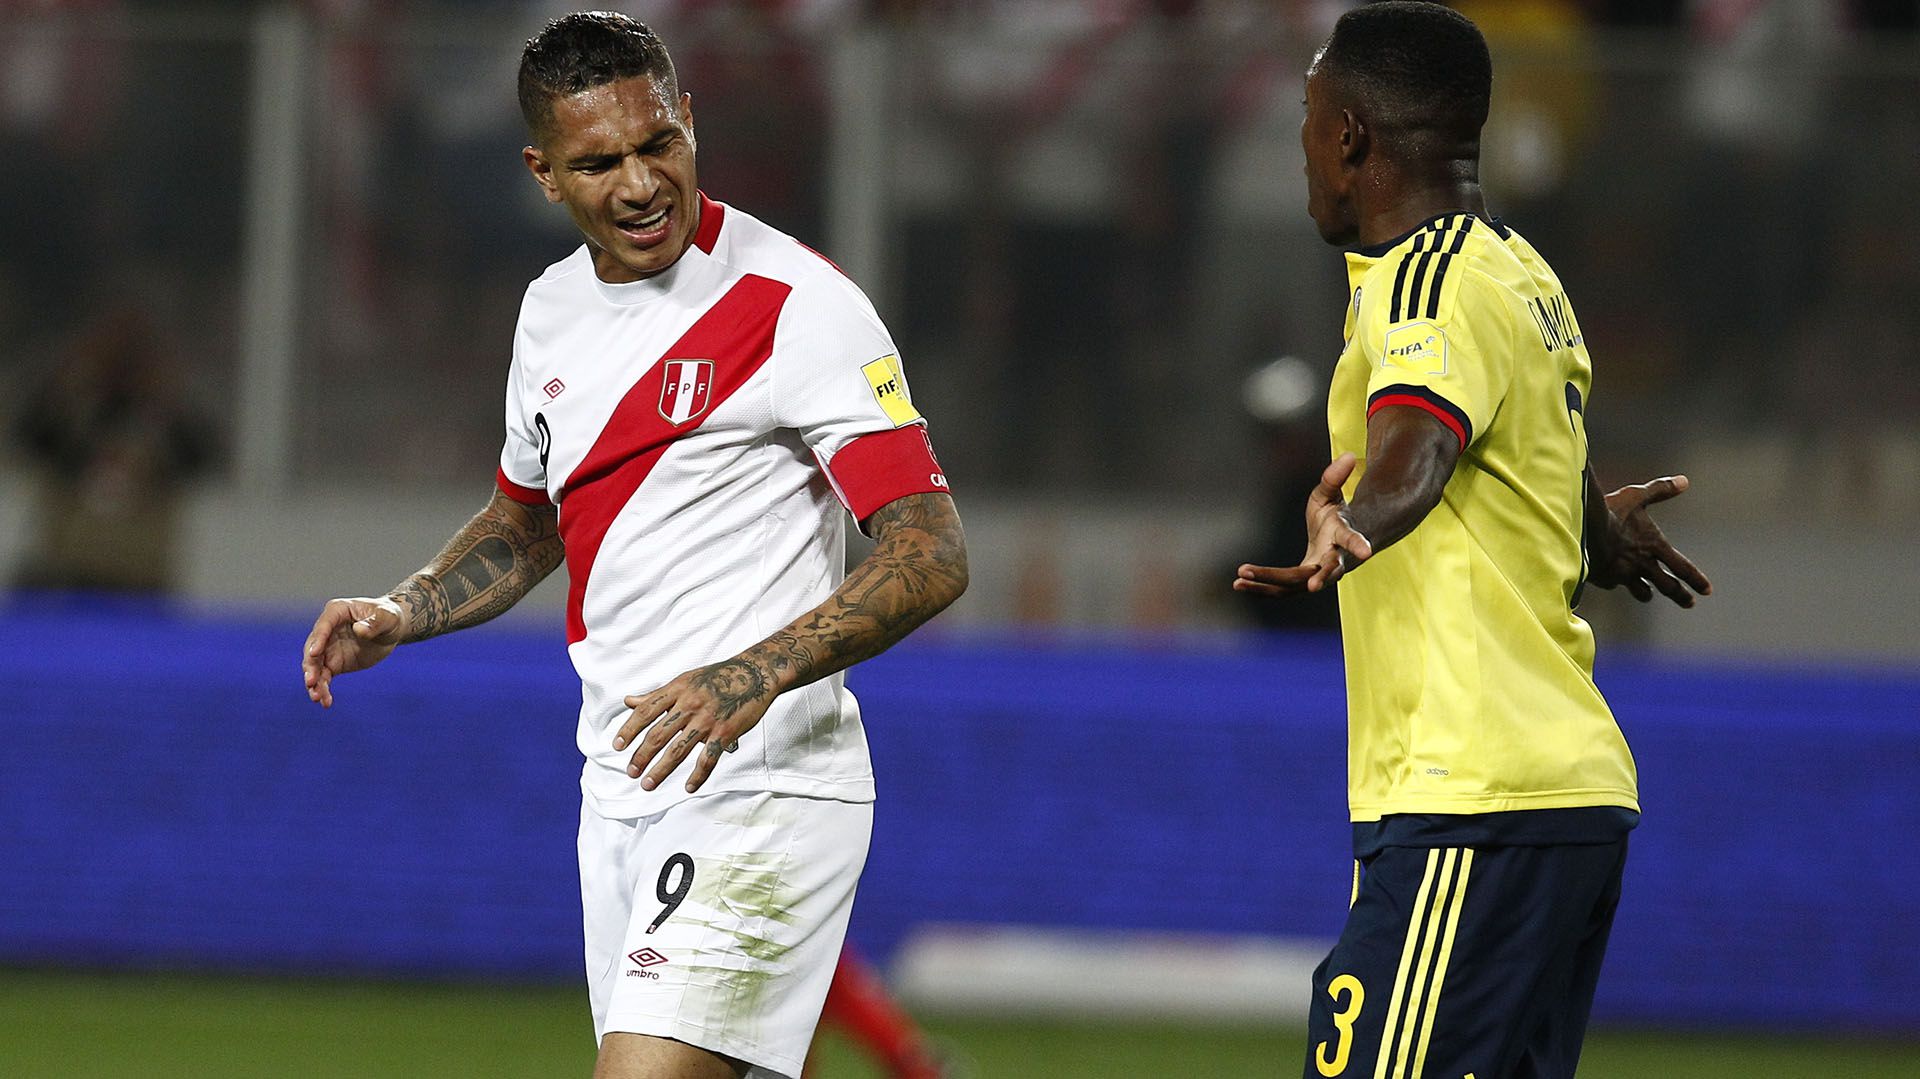 LIMA, PERU - OCTOBER 10: Paolo Guerrero of Peru argues with Davinson Sanchez of Colombia during match between Peru and Colombia as part of FIFA 2018 World Cup Qualifiers at National Stadium on October 10, 2017 in Lima, Peru. (Photo by Leonardo Fernandez/Getty Images)